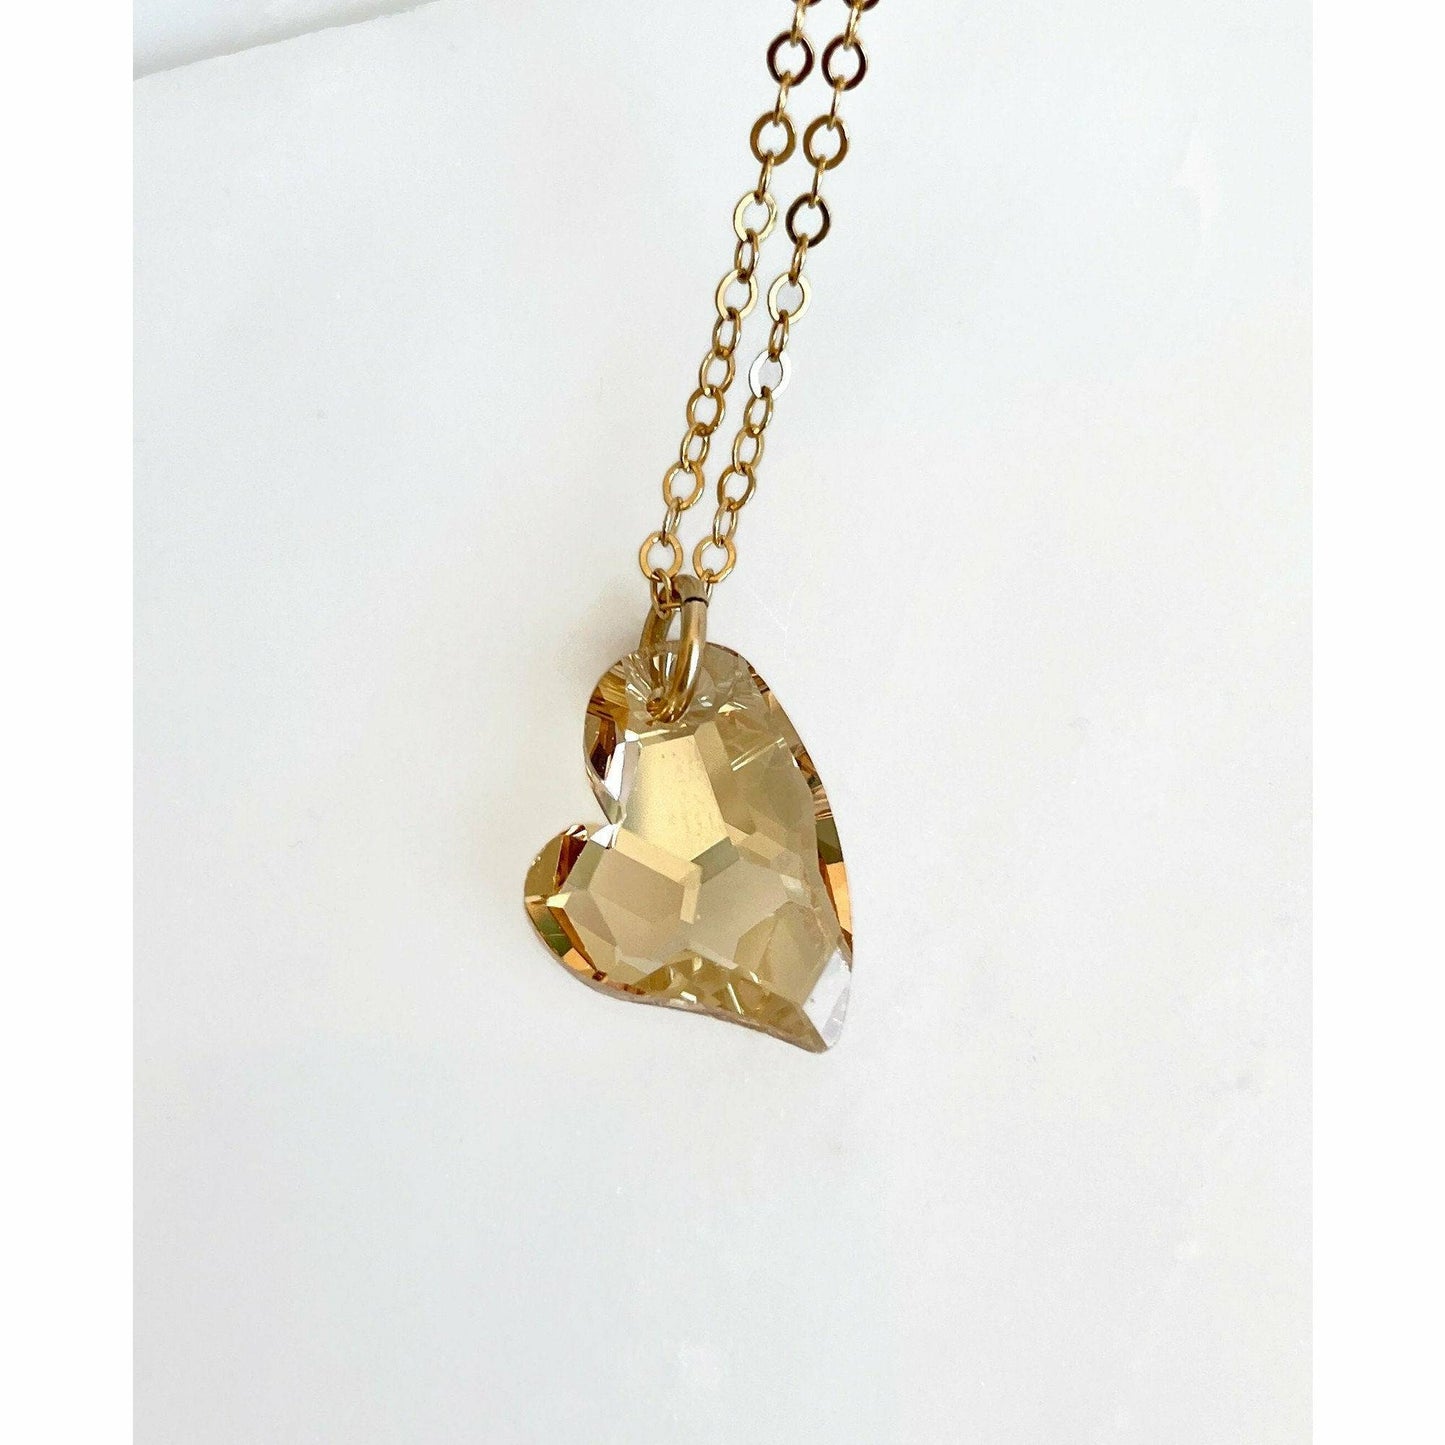 Gold crystal heart necklace on 14k gold filled chain